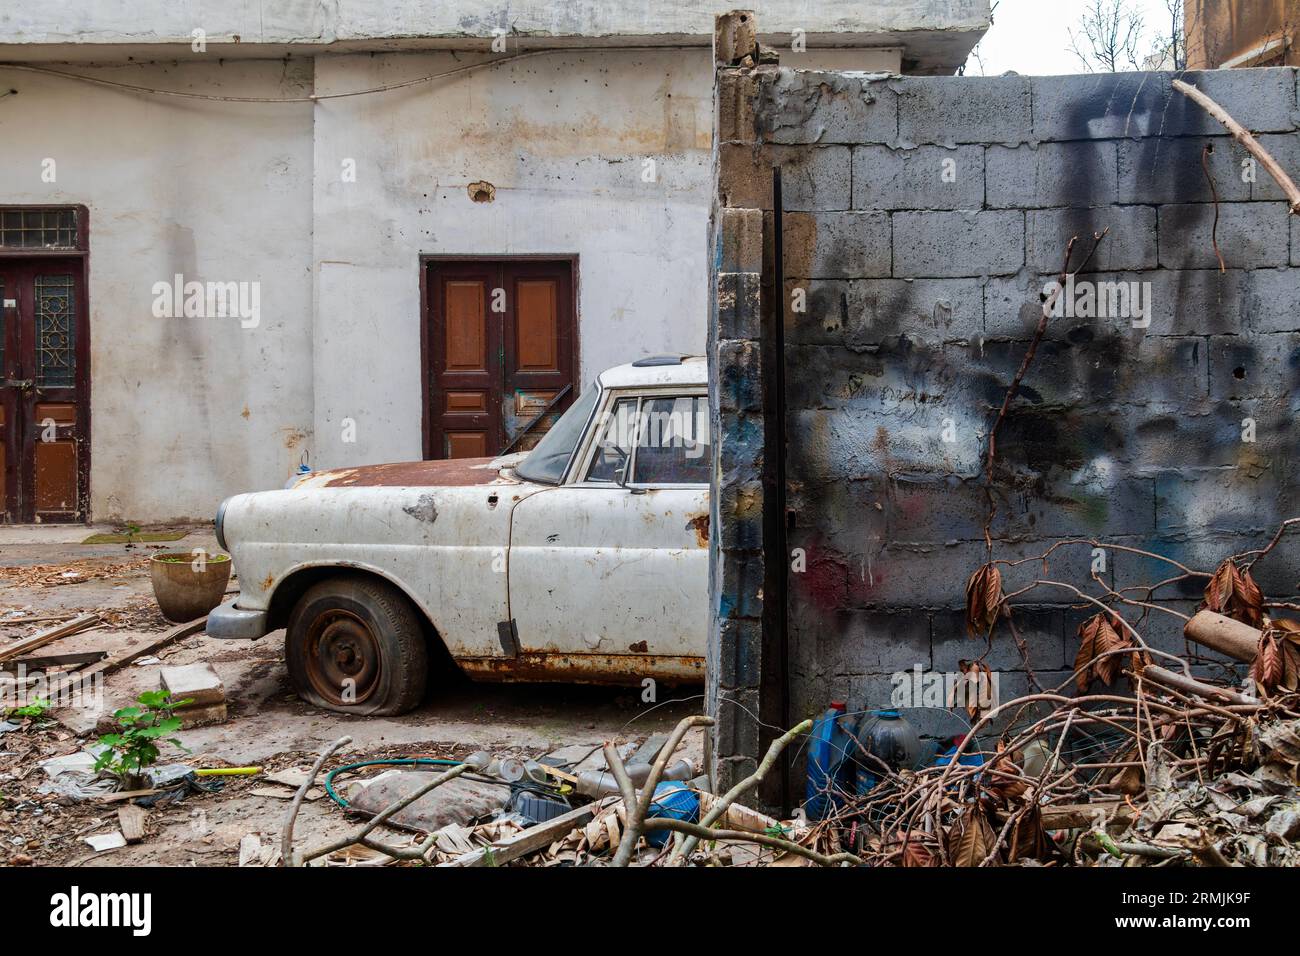 Rusty old car parked next to a brick wall. The car is a Mercedes-Benz W110, and it is in a state of disrepair. Stock Photo